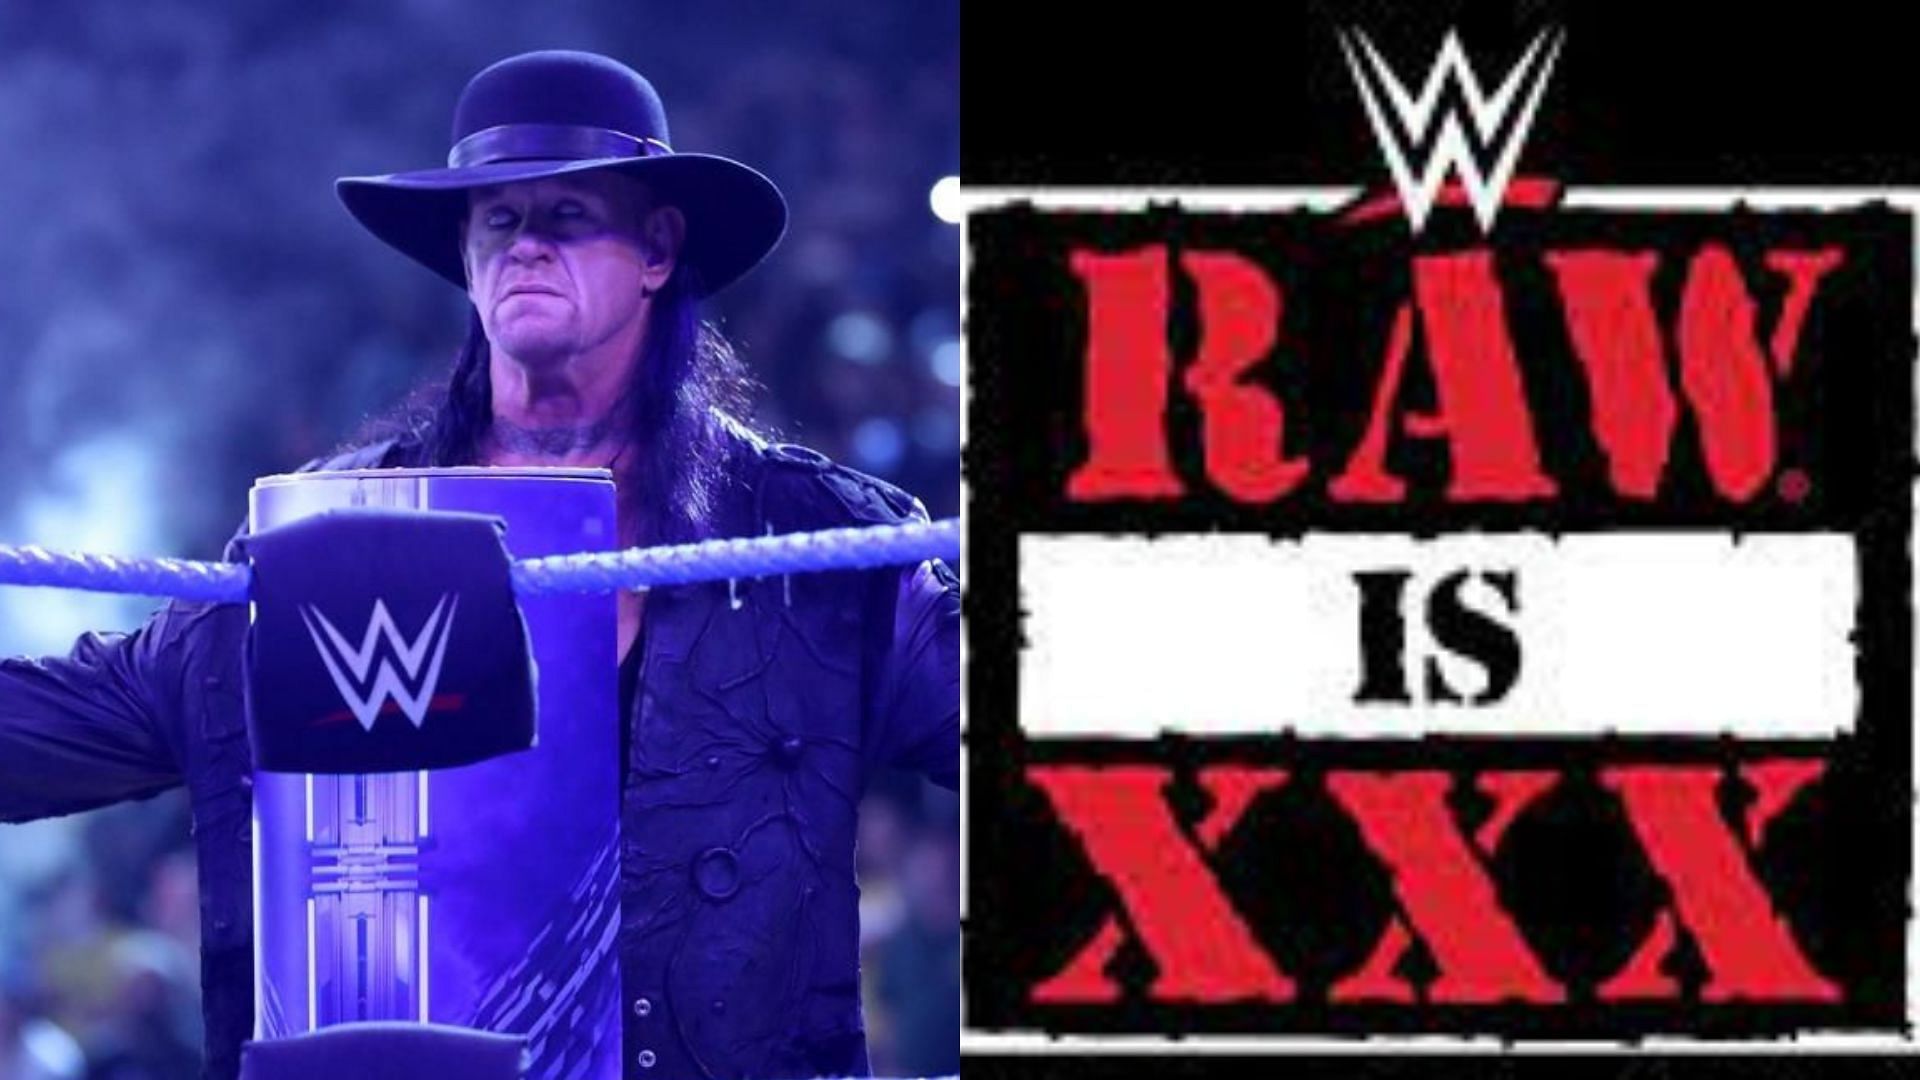 WWE Hall of Famer The Undertaker will return at RAW is XXX